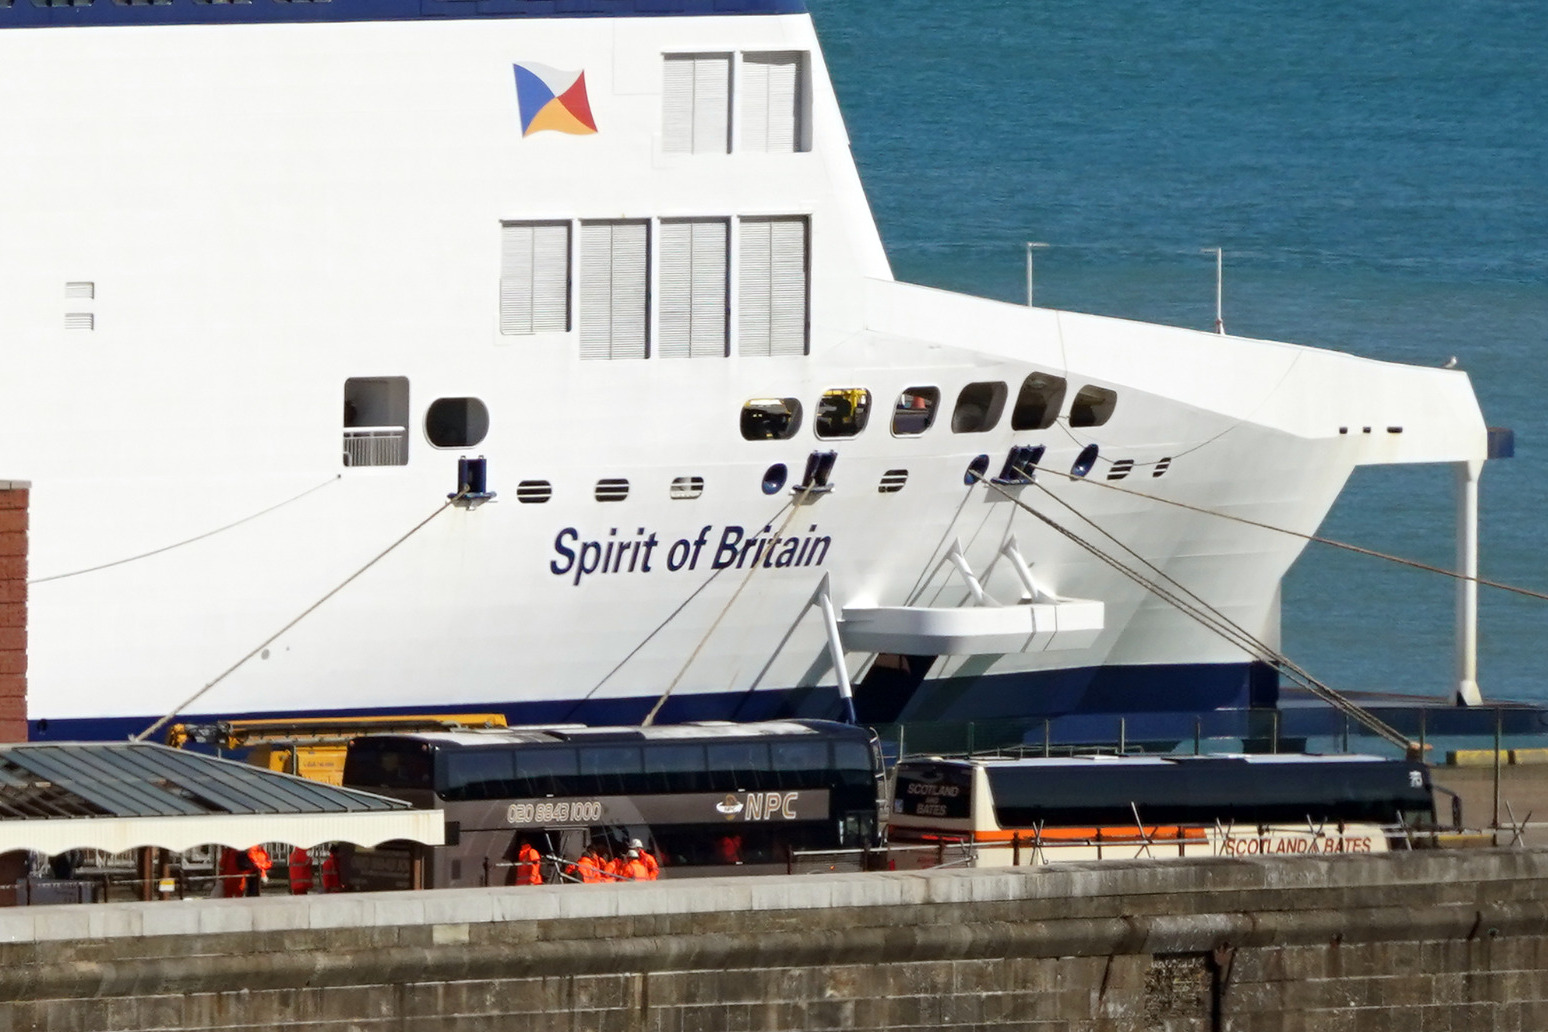 P&O Ferries boat Spirit of Britain detained 